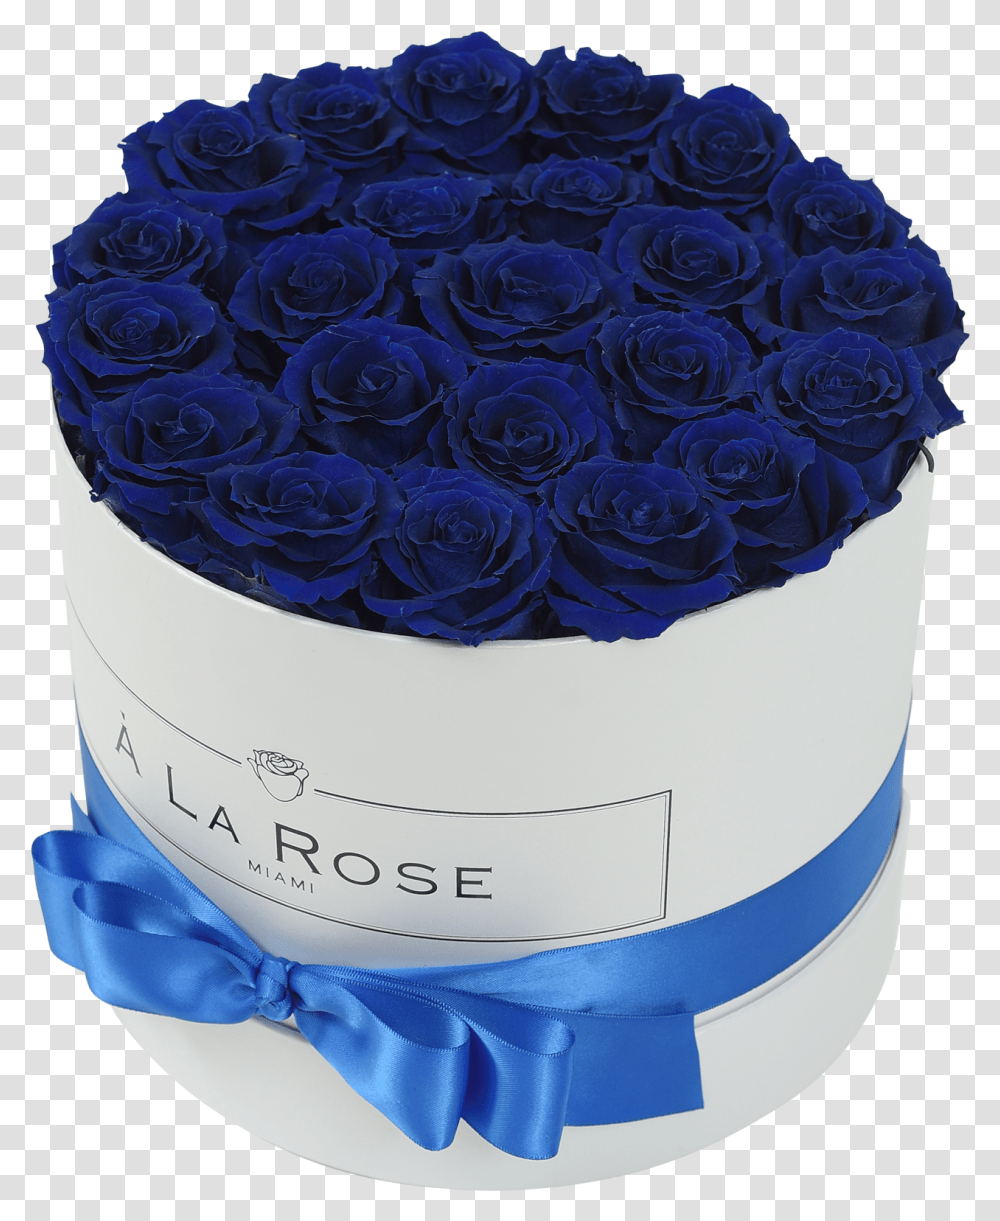 Royal Blue Roses In A BoxClass Lazyload Lazyload, Plant, Flower, Blossom, Cake Transparent Png